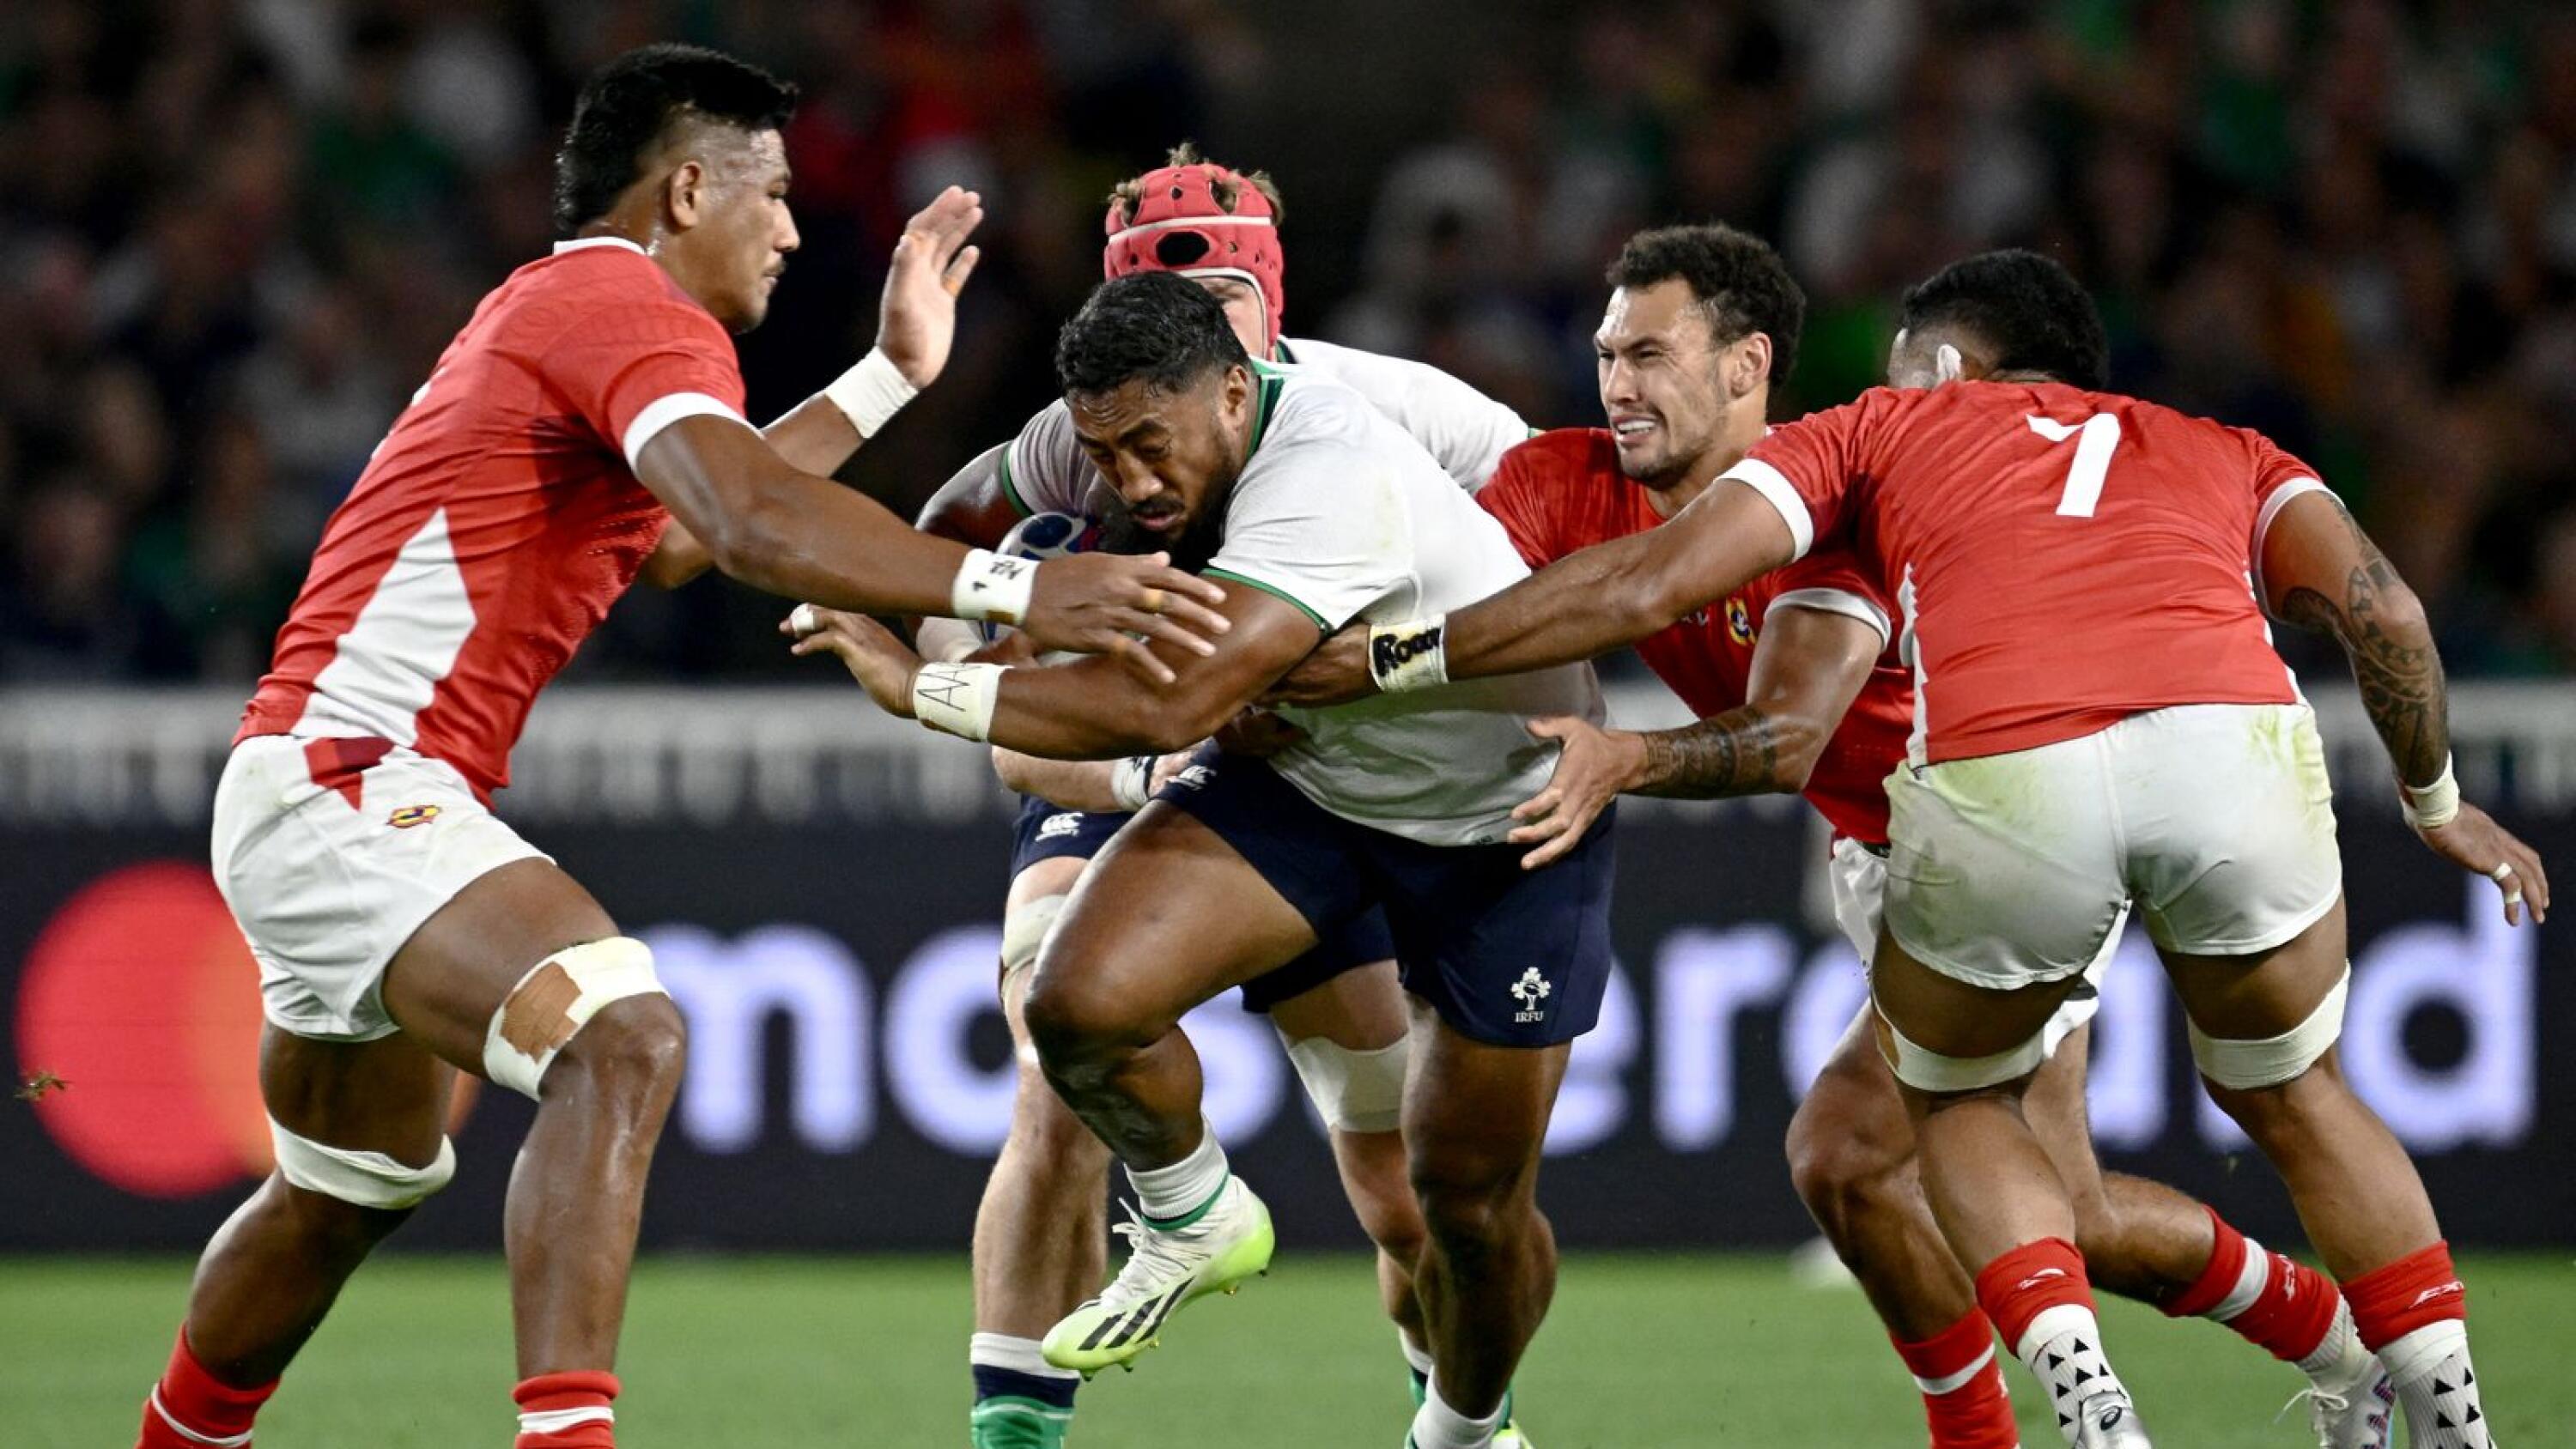 Ireland's centre Bundee Aki runs with the ball surrounded by Tonga's players during their Rugby World Cup Pool B match at the Stade de la Beaujoire in Nantes on Saturday